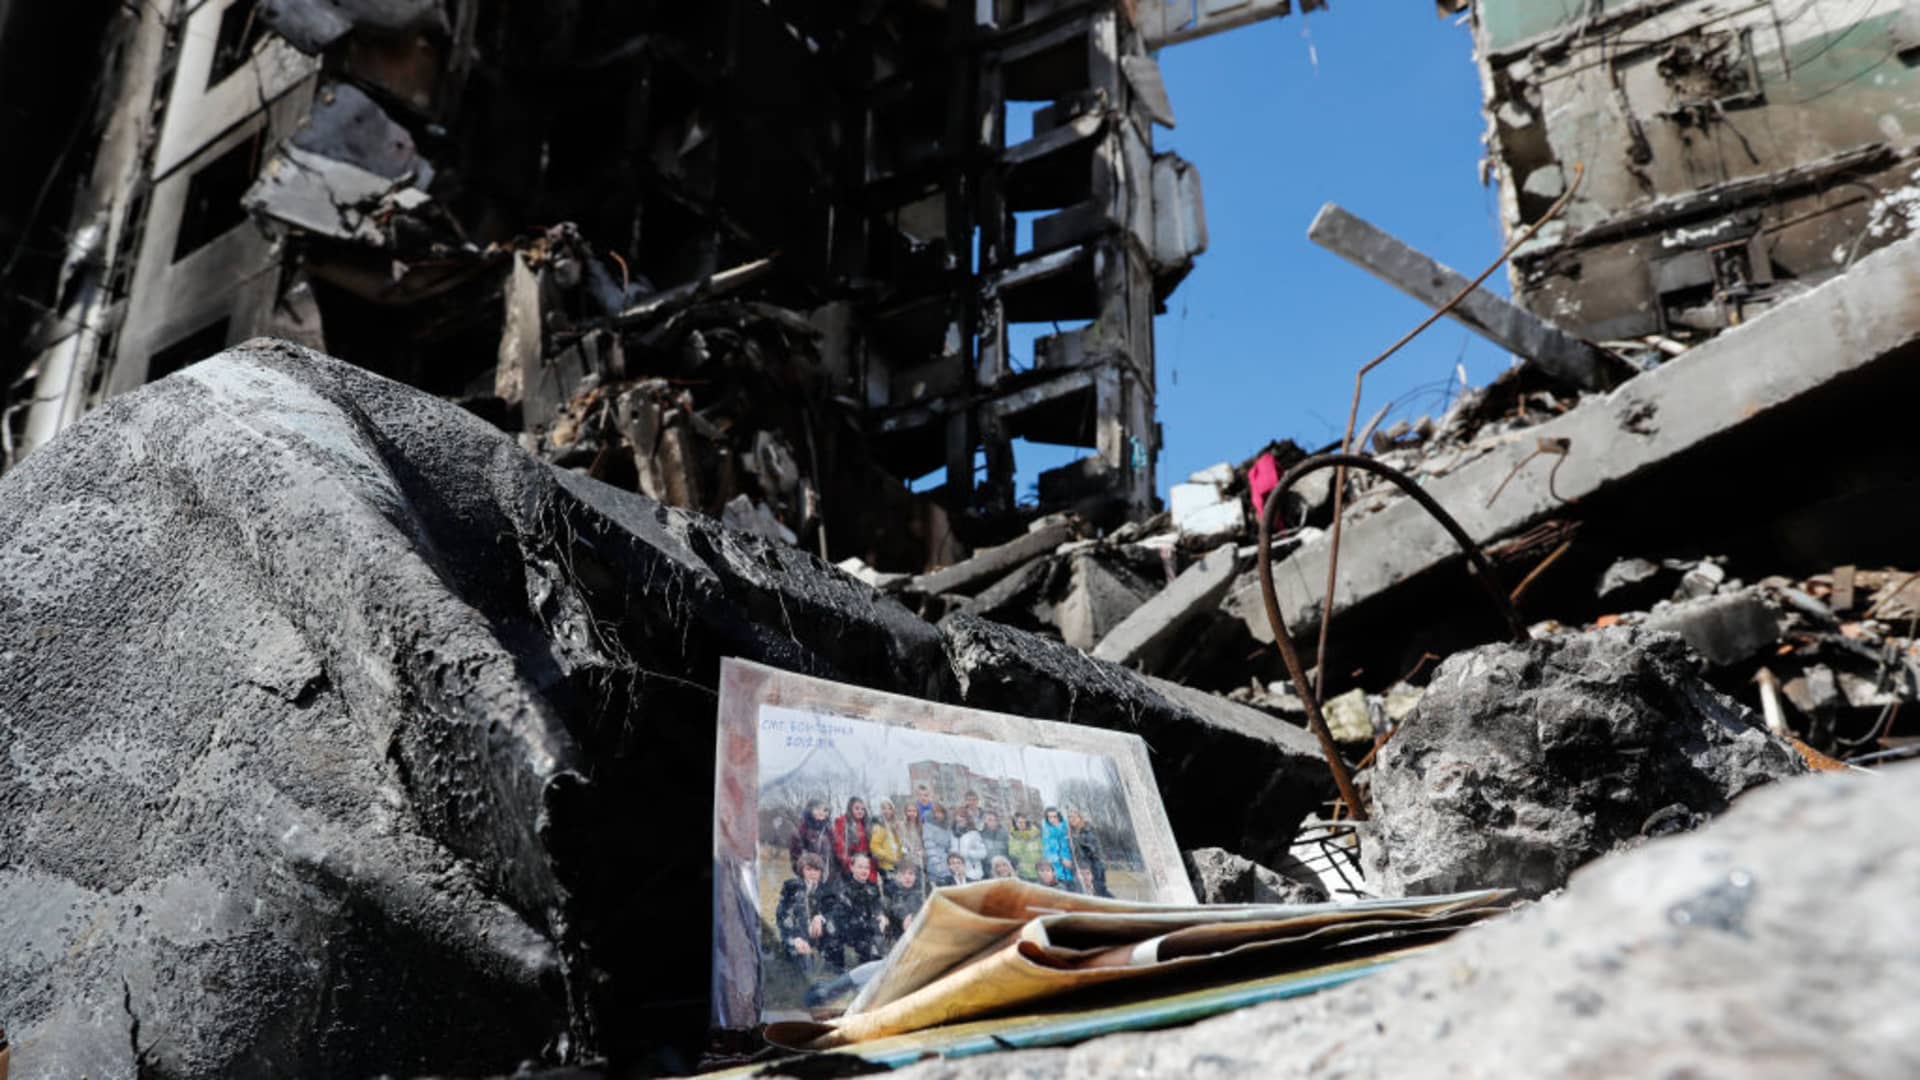 A group photo of Ukrainians is seen in the wreckage of a damaged residential building by the Russian air raids in Borodyanka, Bucha Raion of Kyiv Oblast, on 7 April 2022.